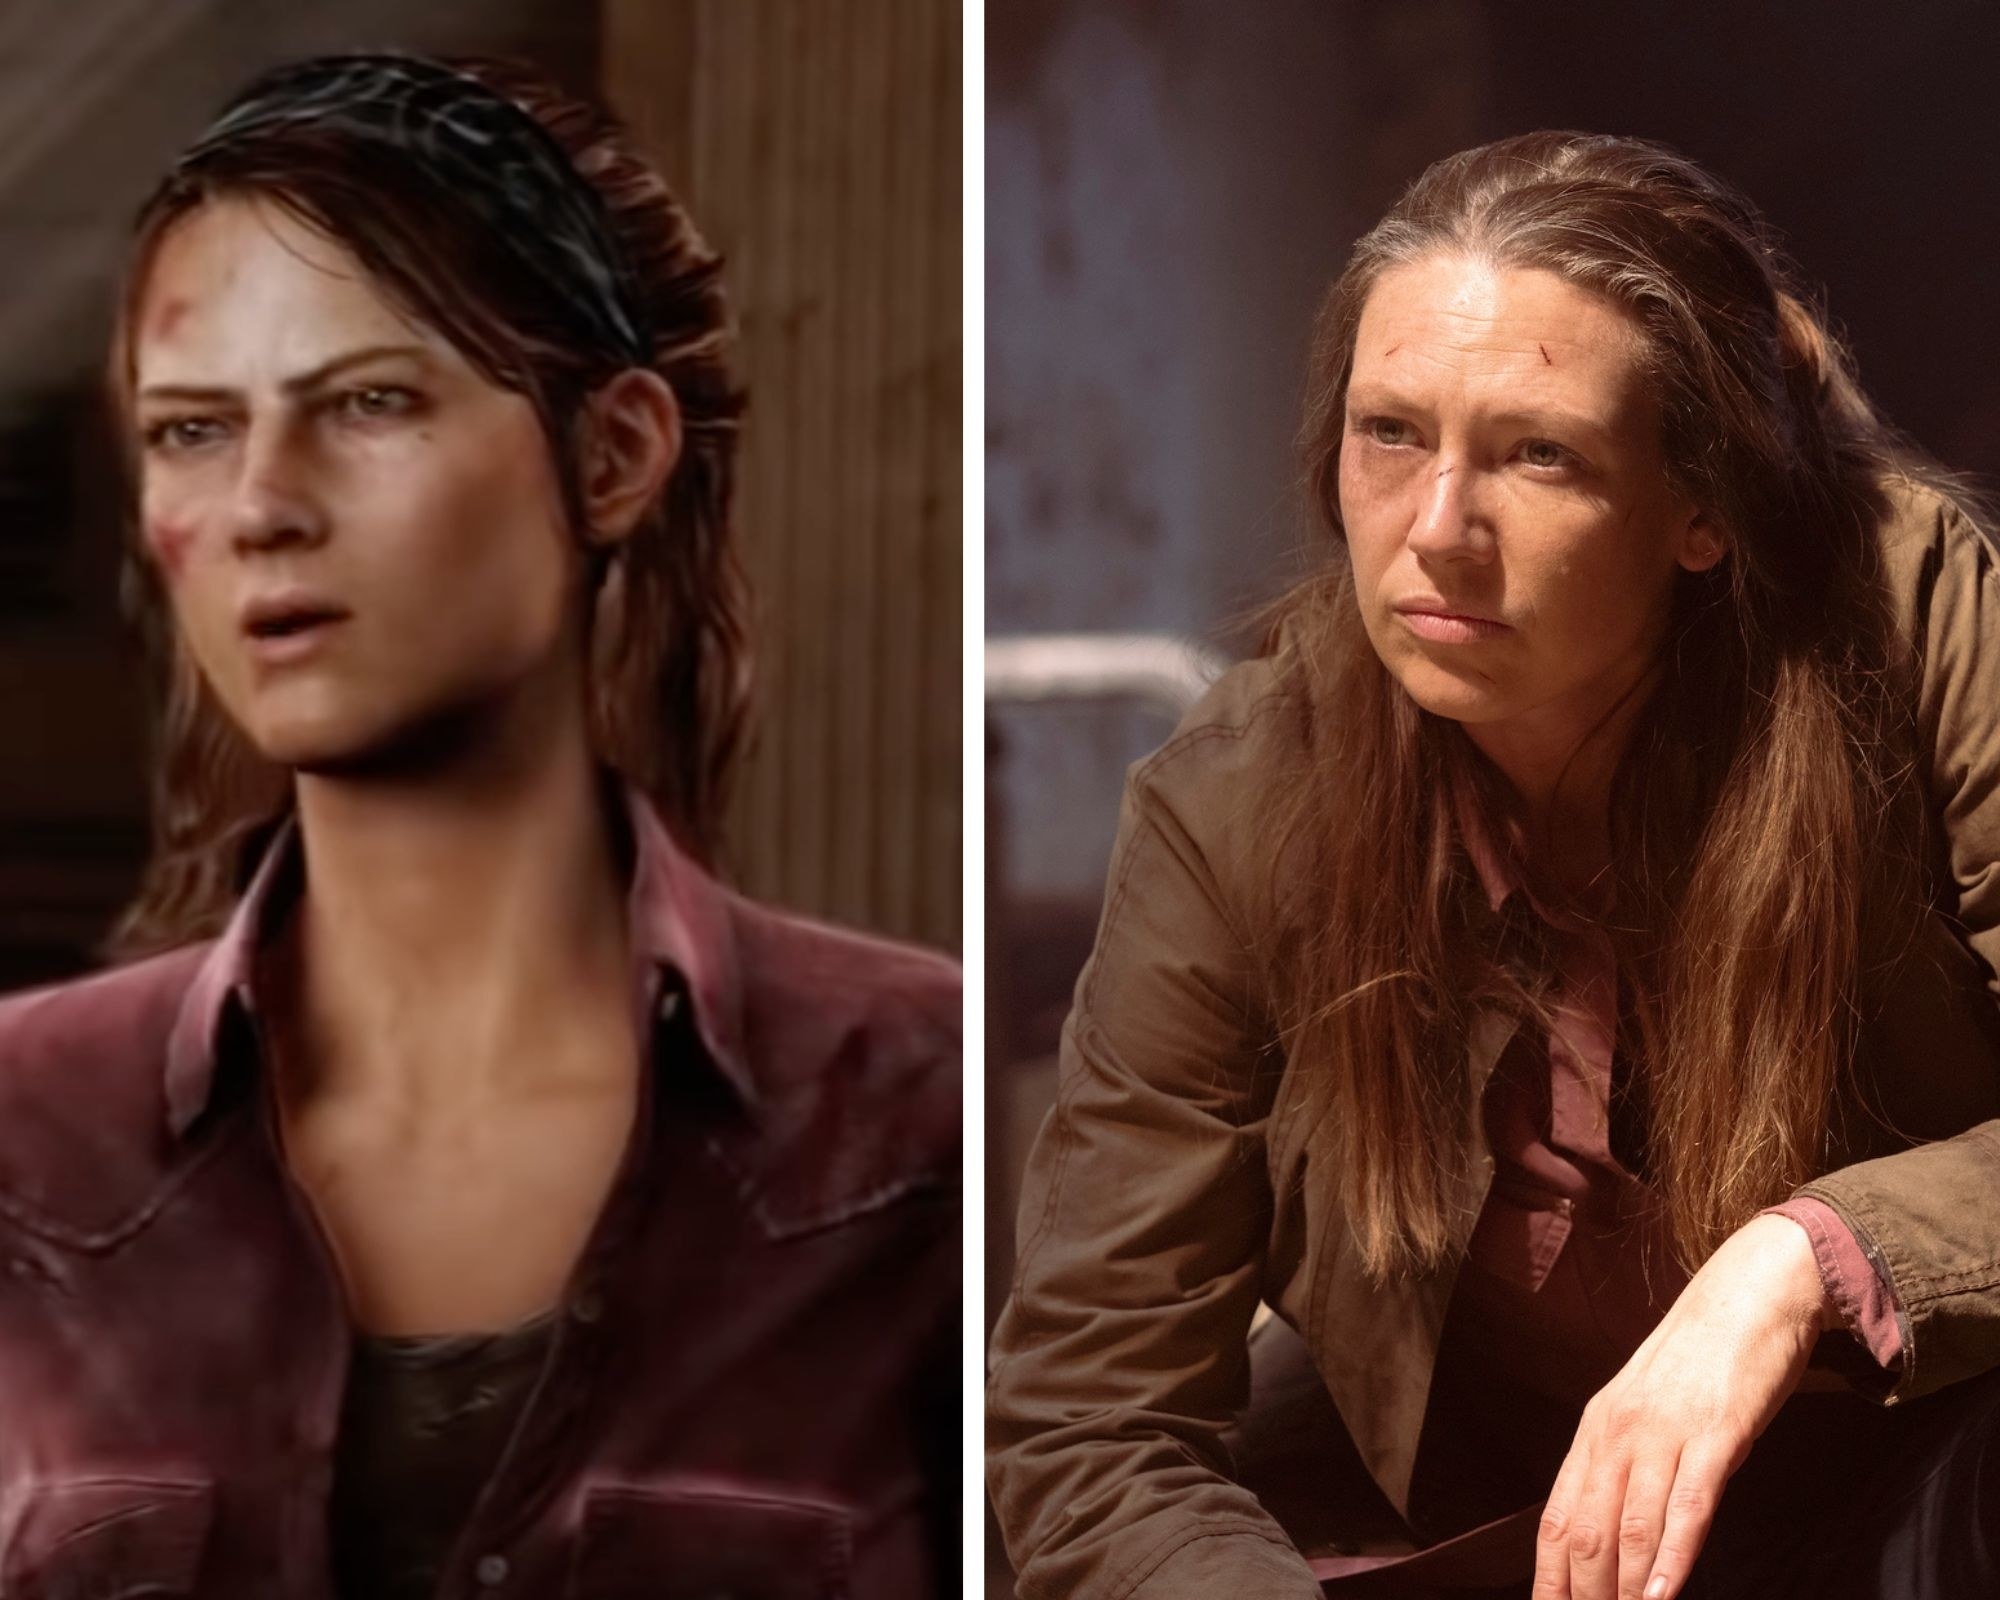 Tess video game character and Tess in The Last of Us TV show